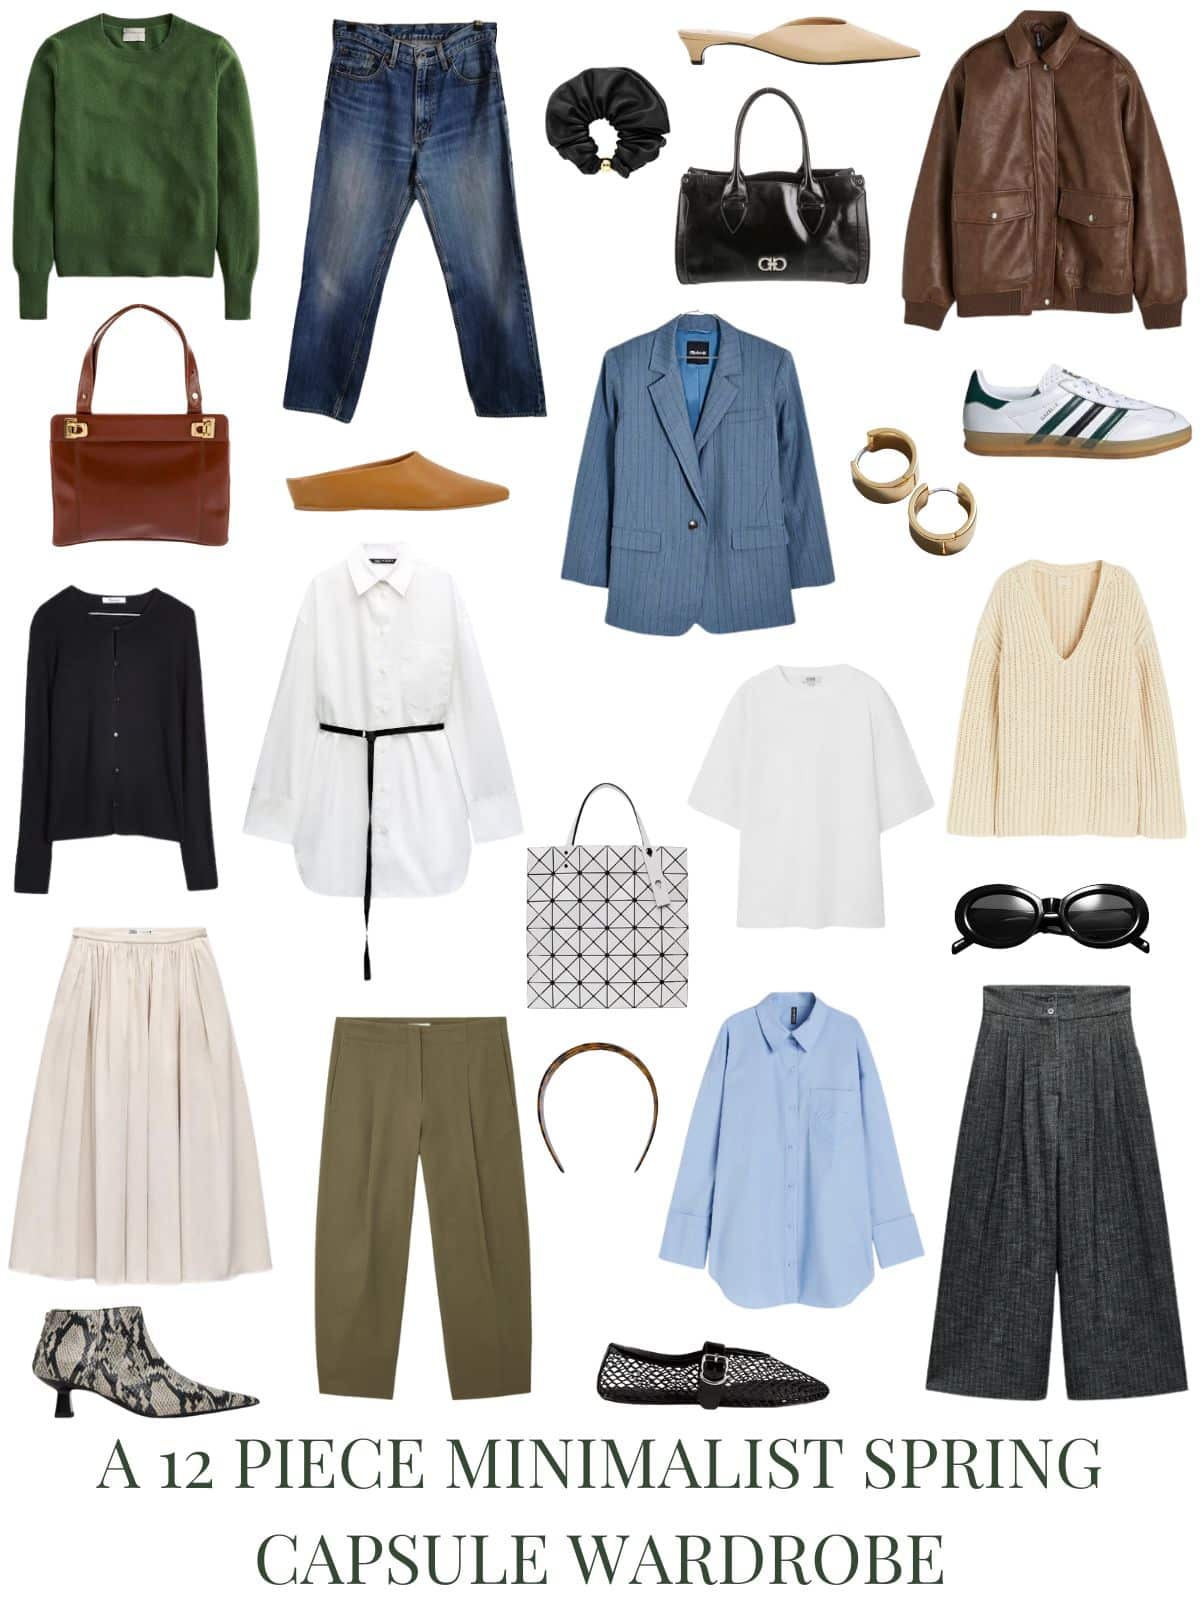 A white background with 12 pieces and accessories for A 12 Piece Minimalist Spring Capsule Wardrobe.